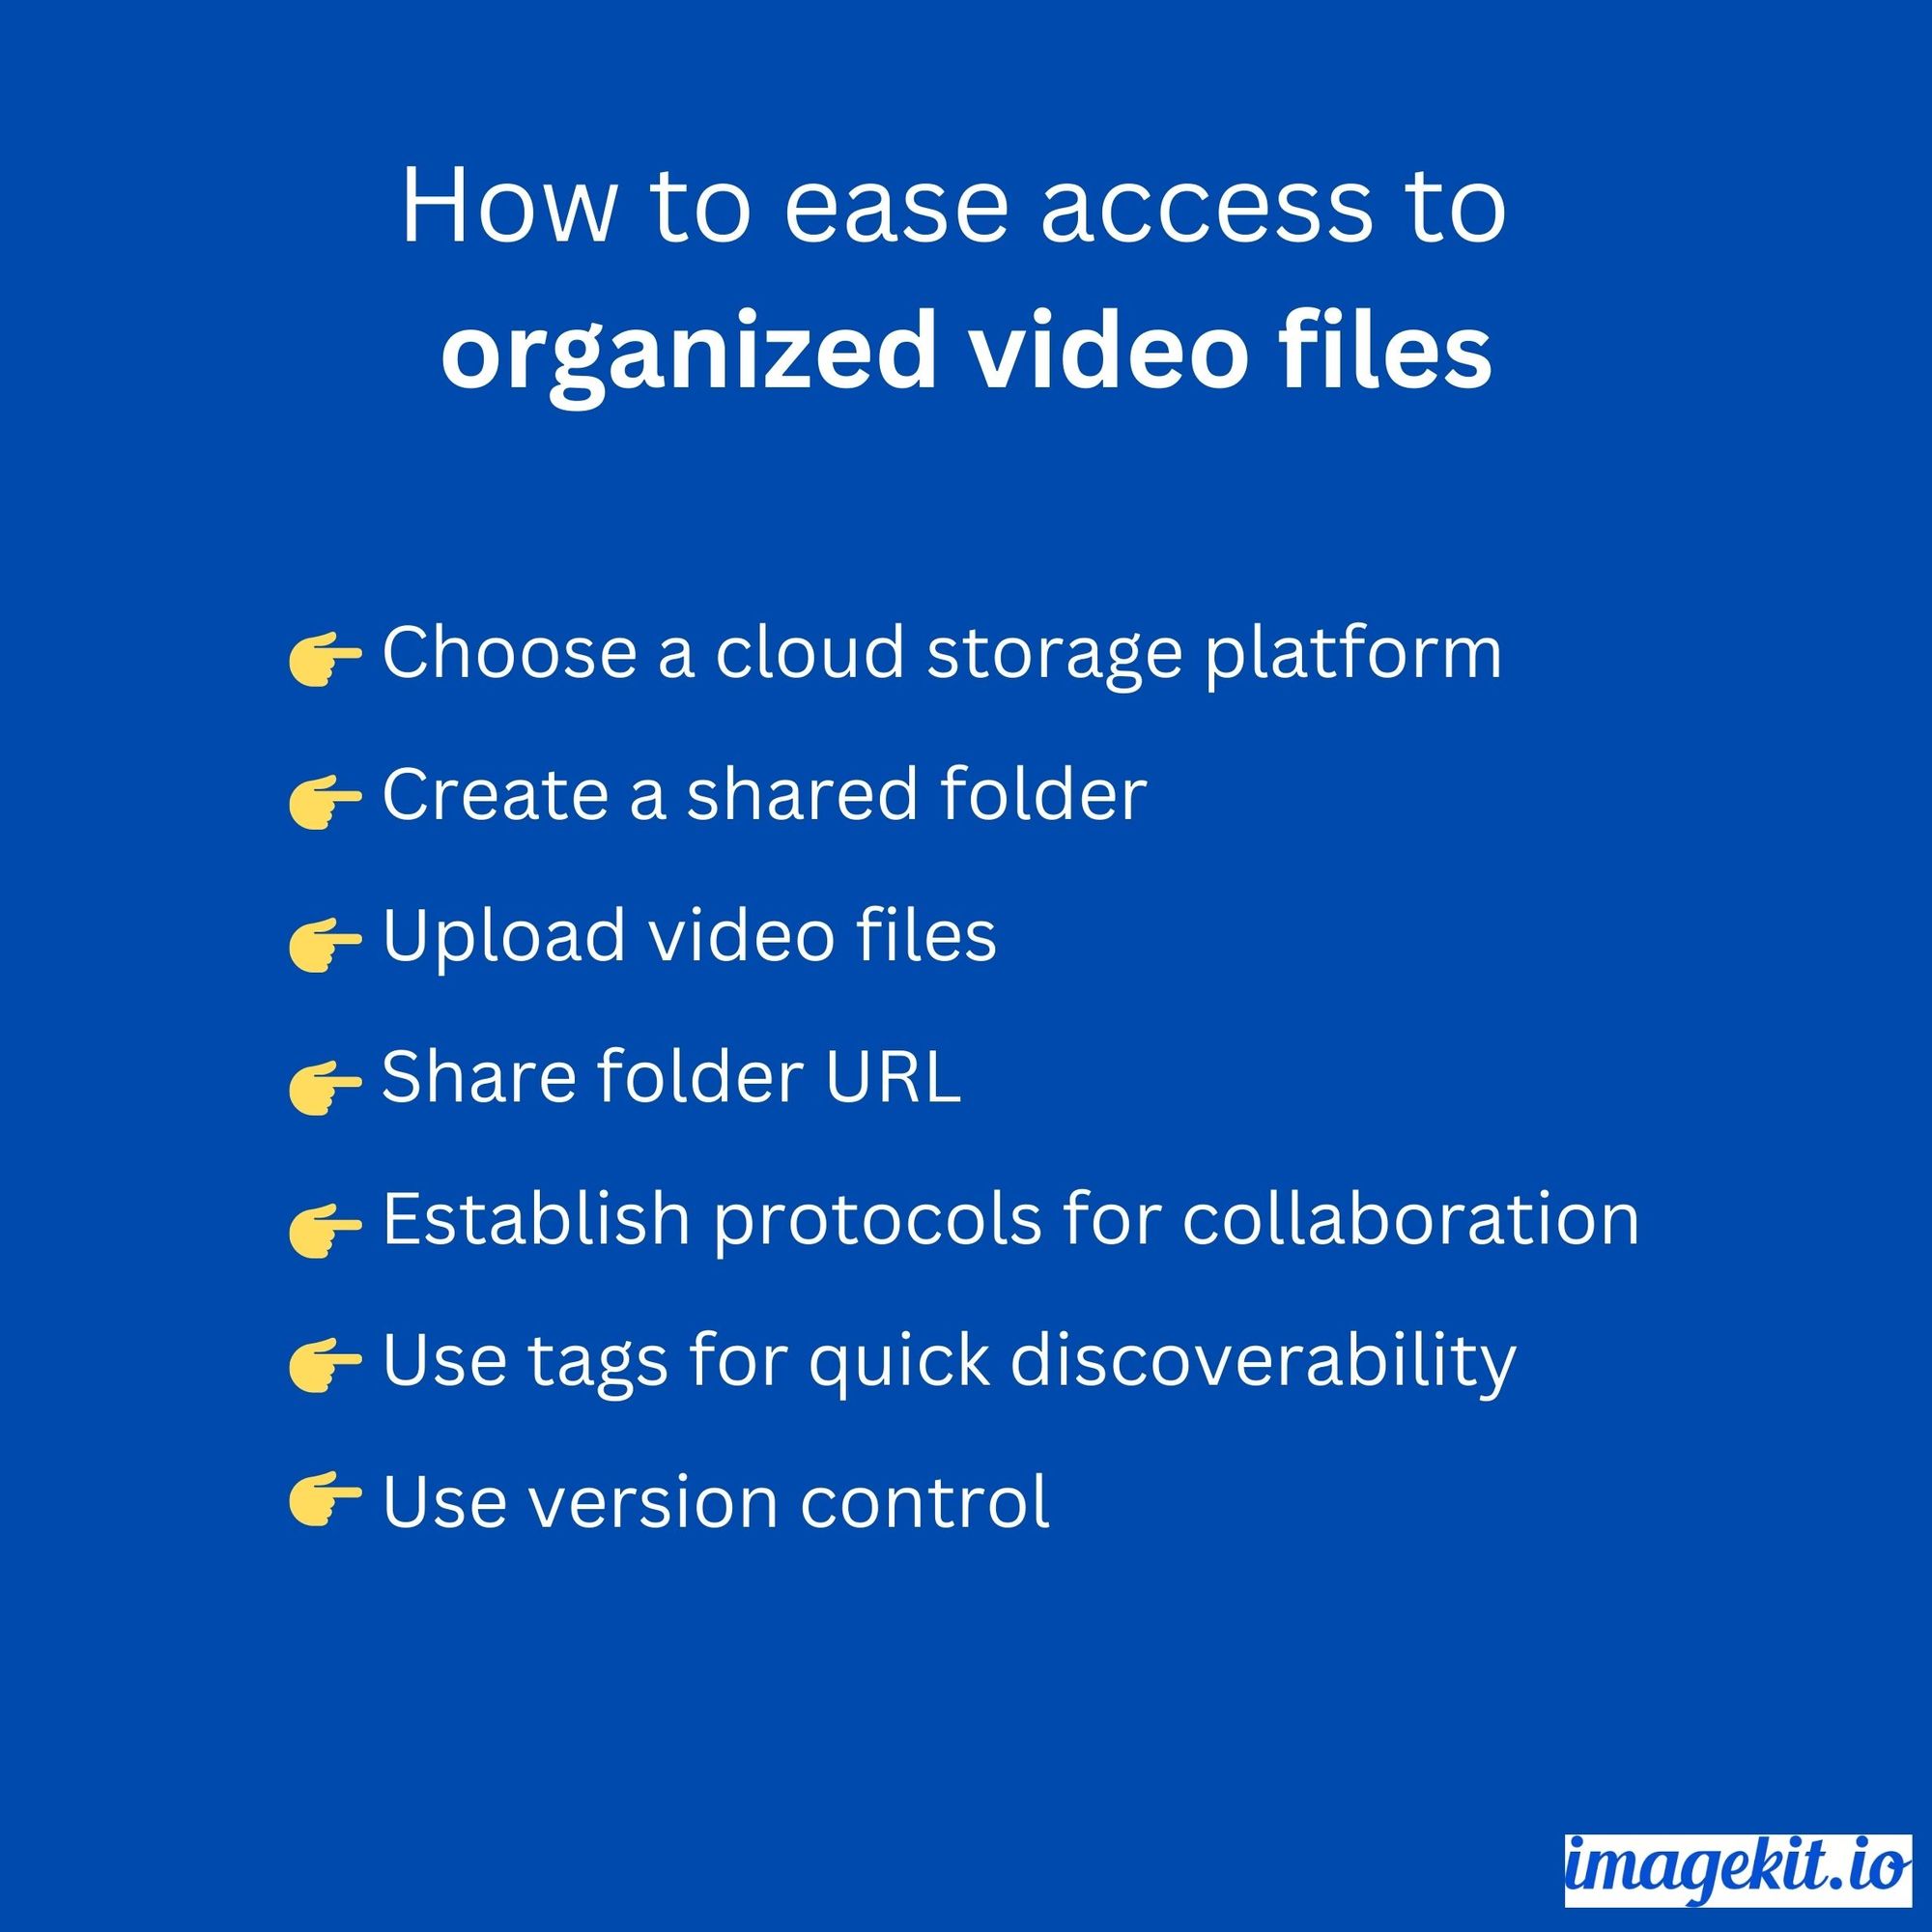 Ease access to organized video files